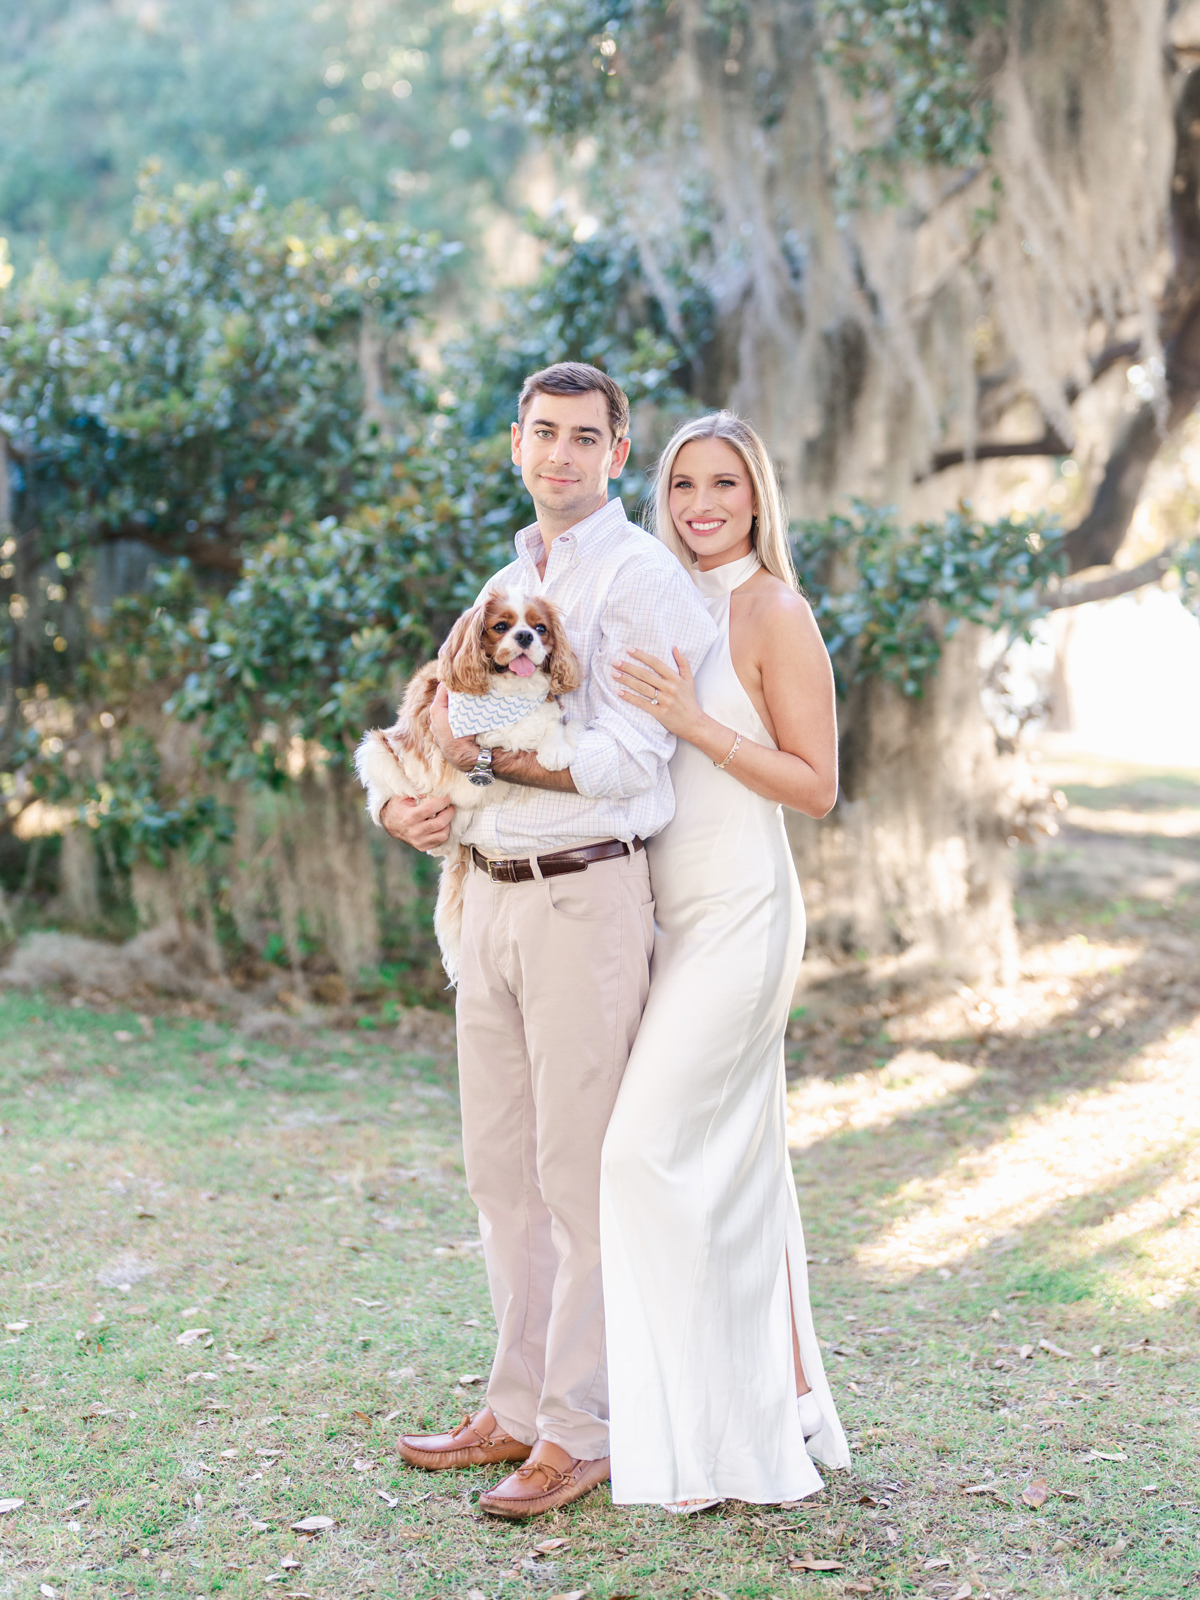 Charleston SC Engagement Photographer - Engagement Pictures with Dog